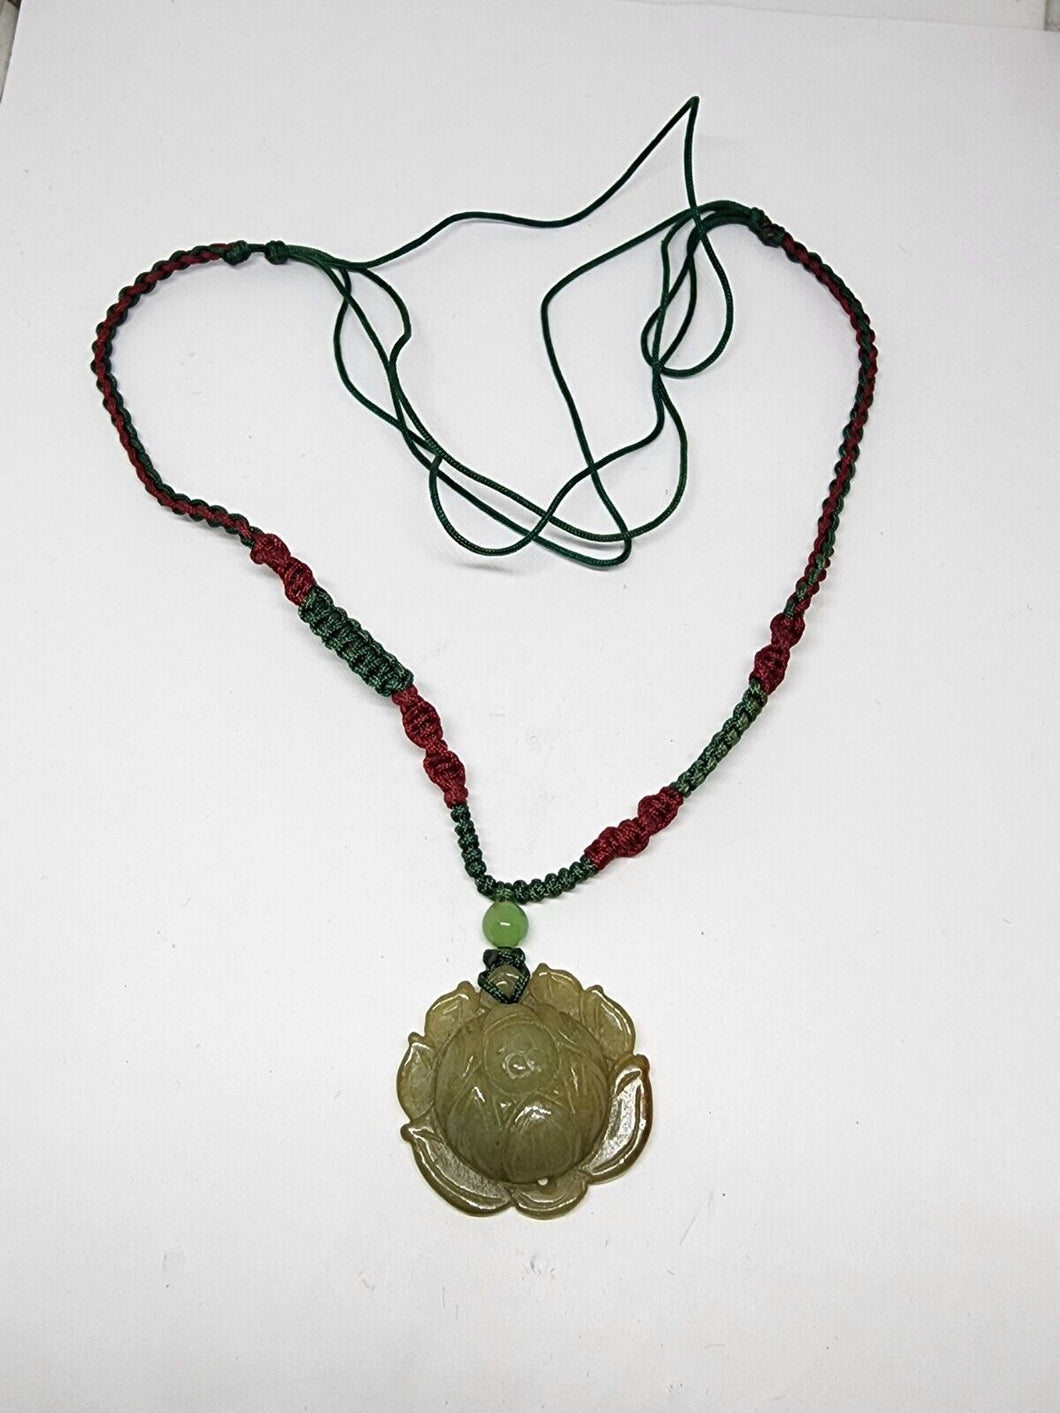 Vintage Hand Carved Lotus Green & Brown Jade Flower Necklace Hand Woven Chain